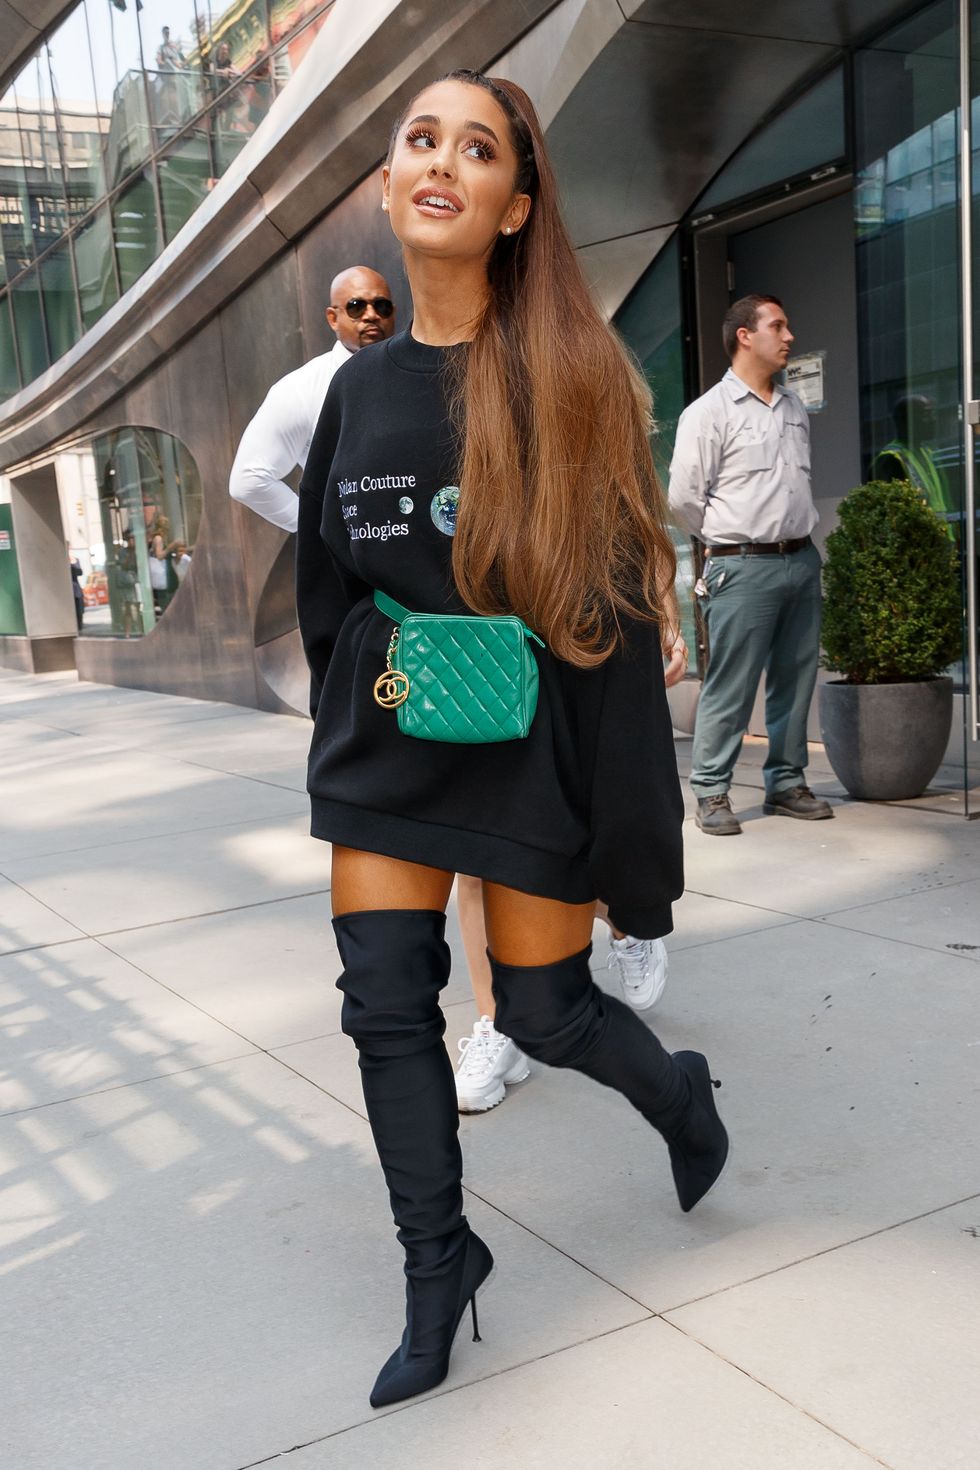 ariana grande wore a blue hoodie and knee high boots as she